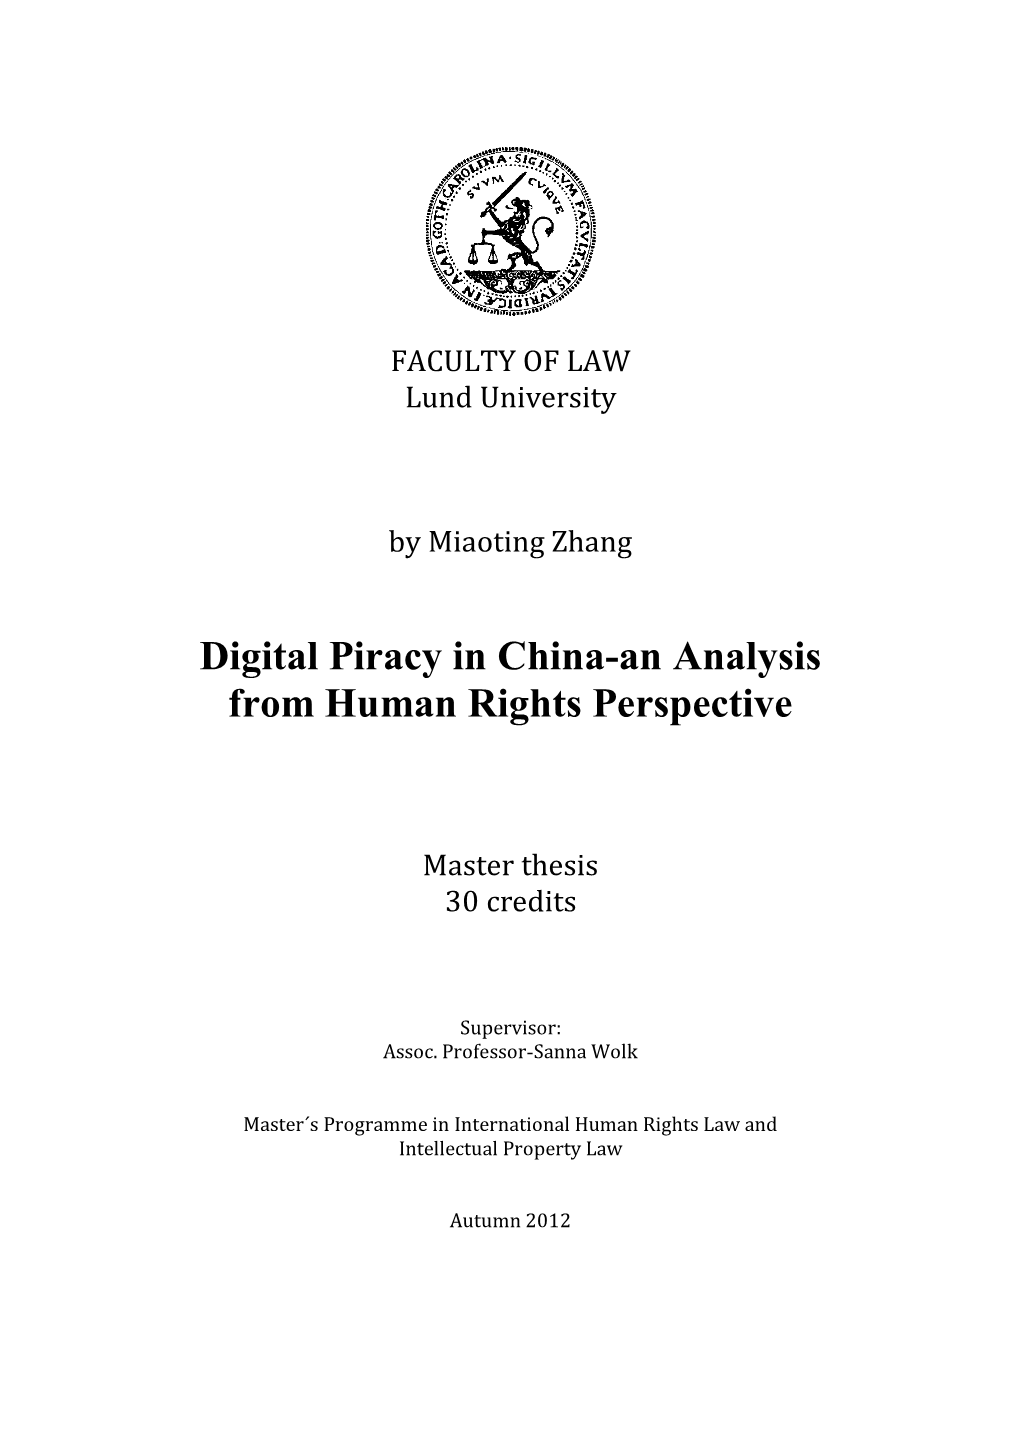 Digital Piracy in China-An Analysis from Human Rights Perspective